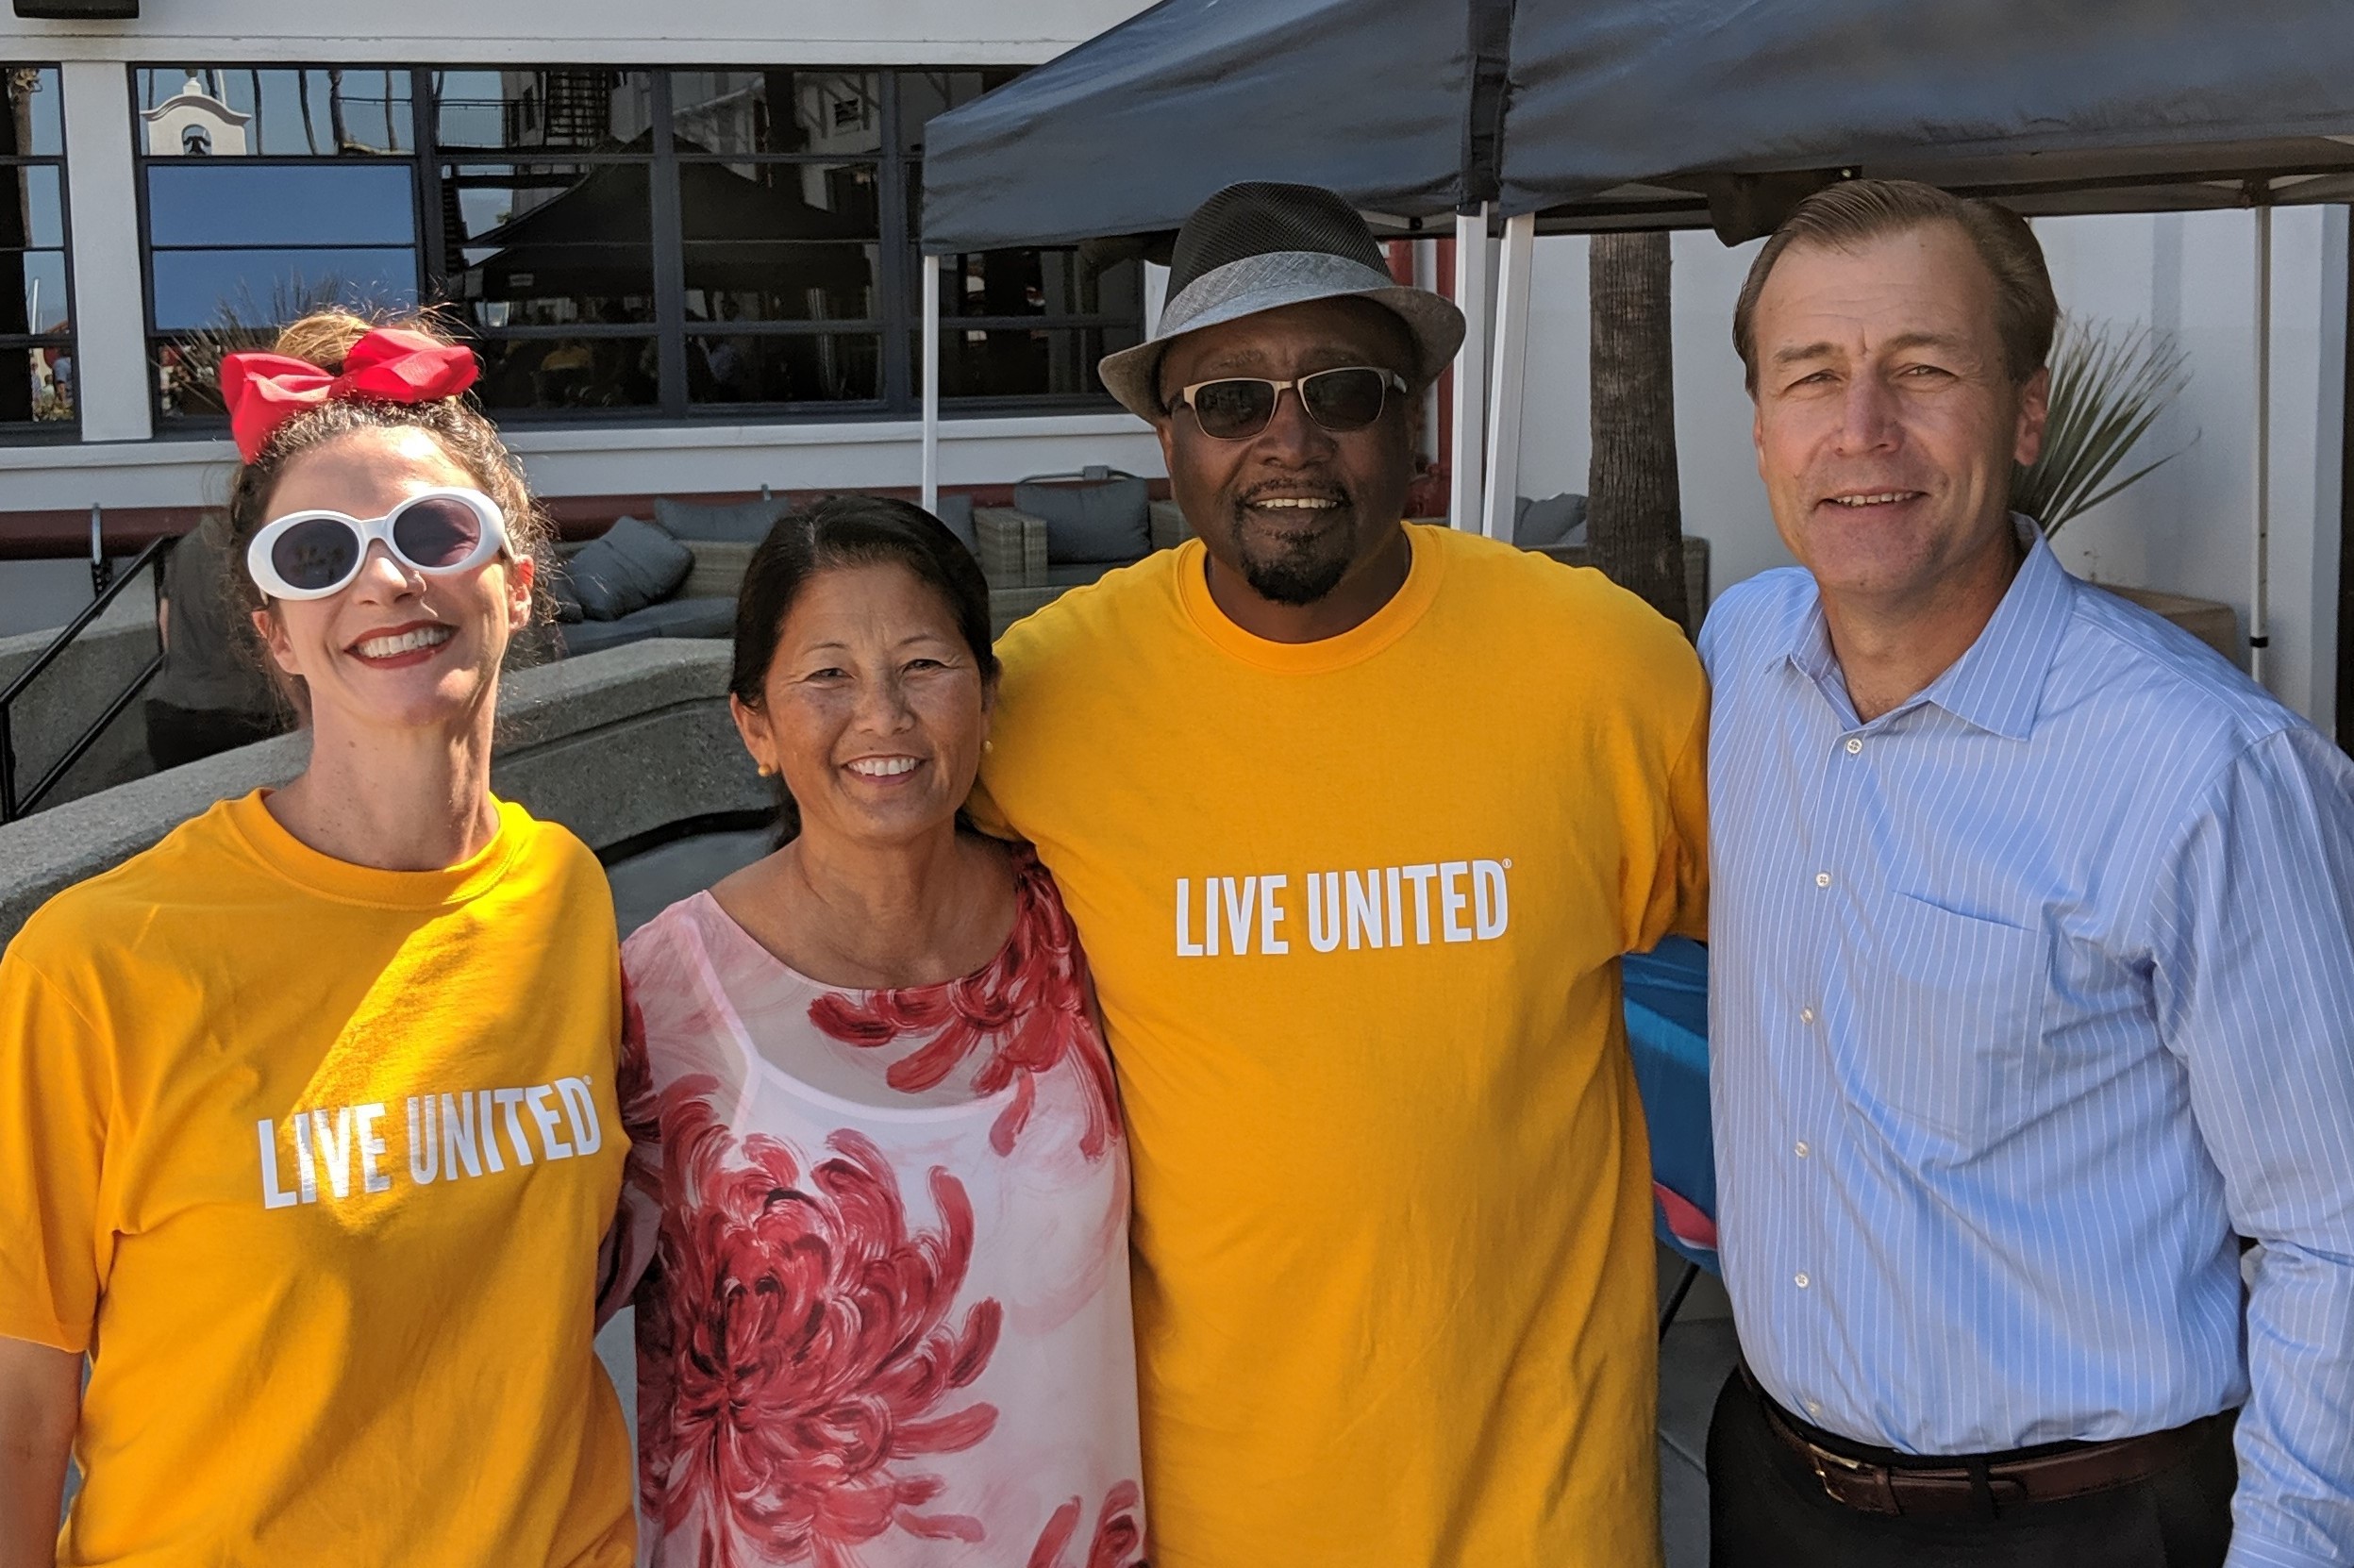 Nancy poses for a photo with people wearing yellow "Live United" shirts